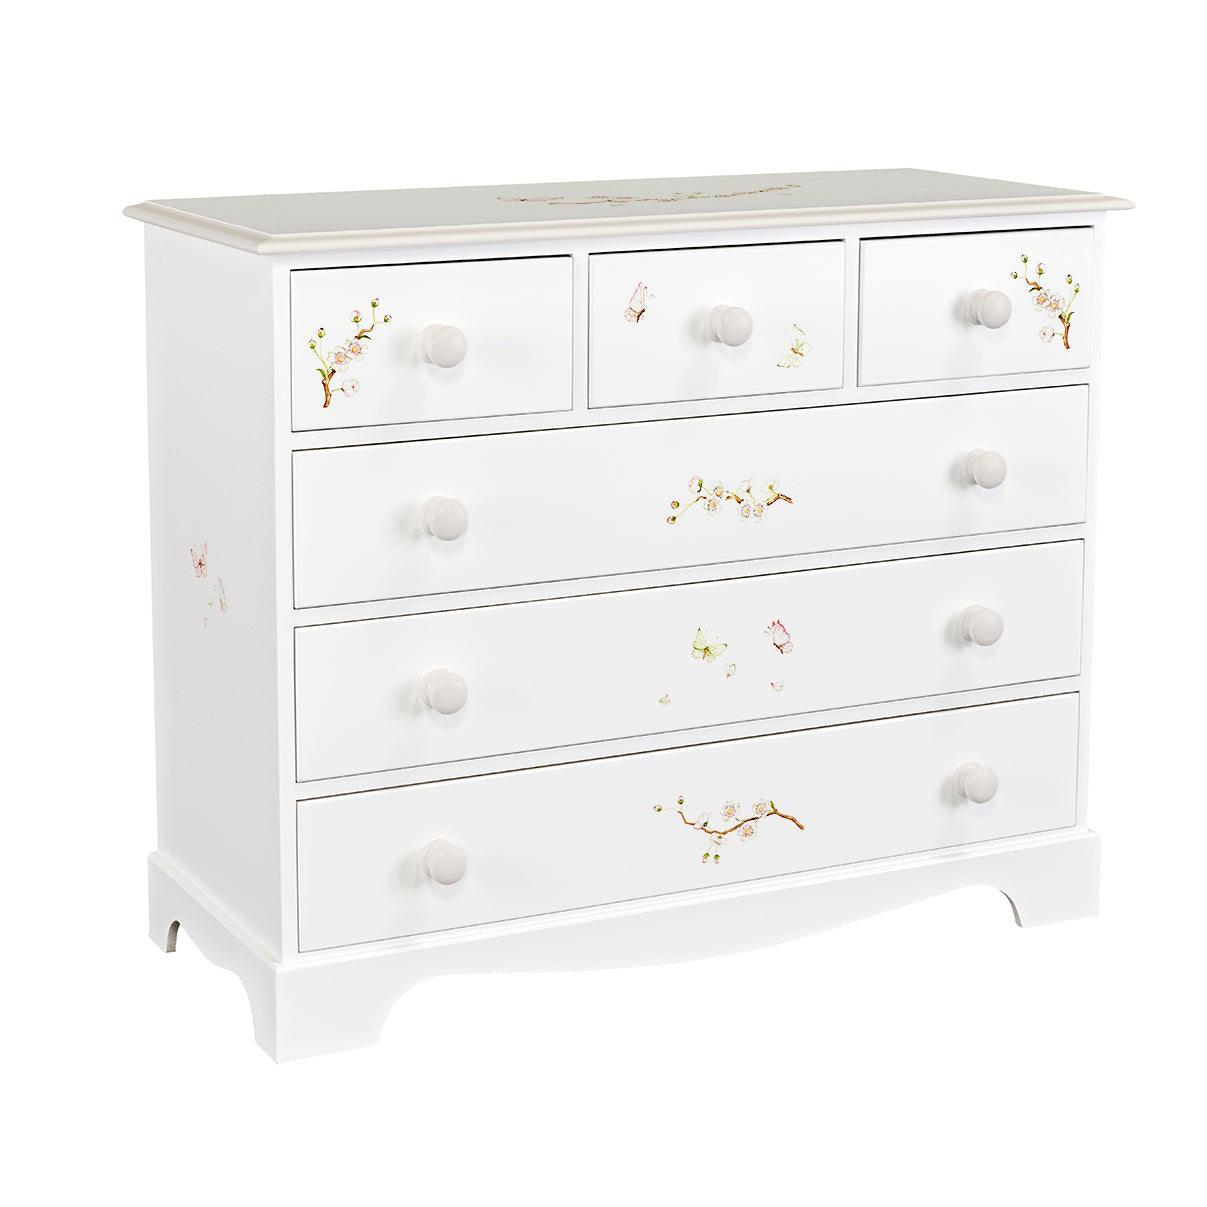 Extra Large Chest of Drawers - Linen Blossom with Soft Jute Trim